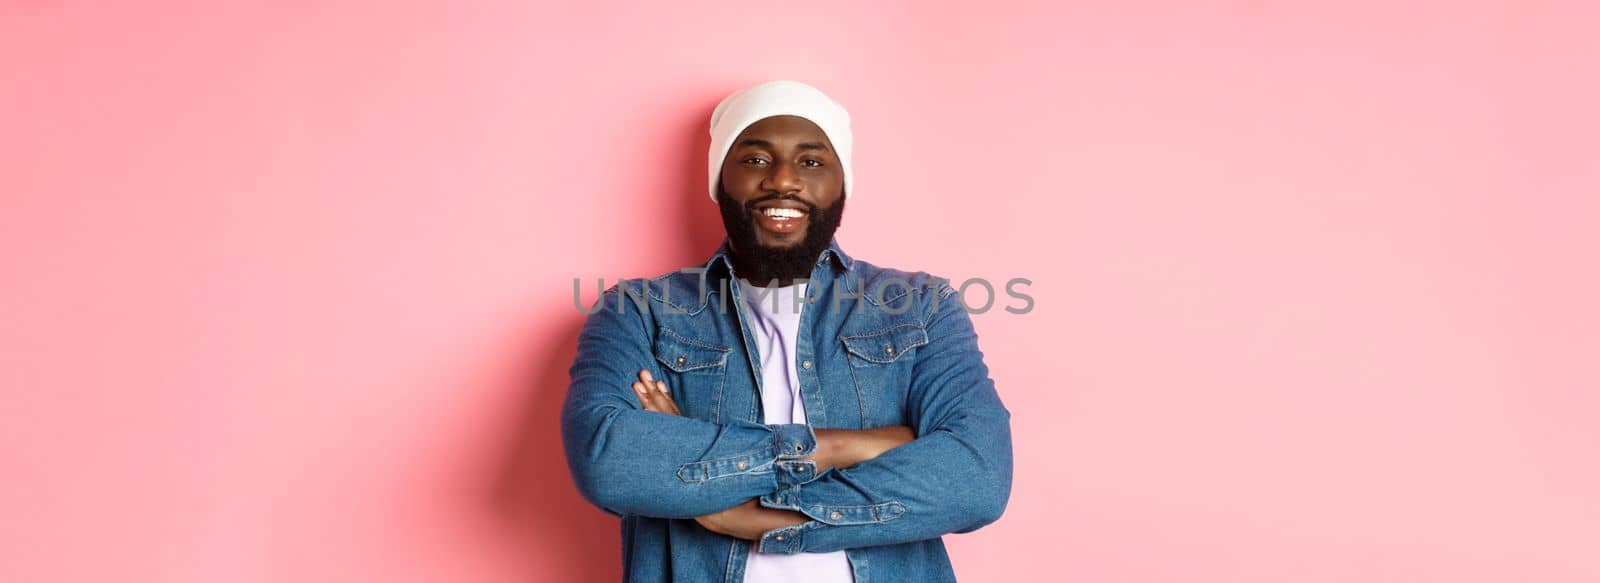 Handsome hip hop style Black man in beanie and denim shirt, smiling confident, cross arms on chest and staring at camera on pink background.